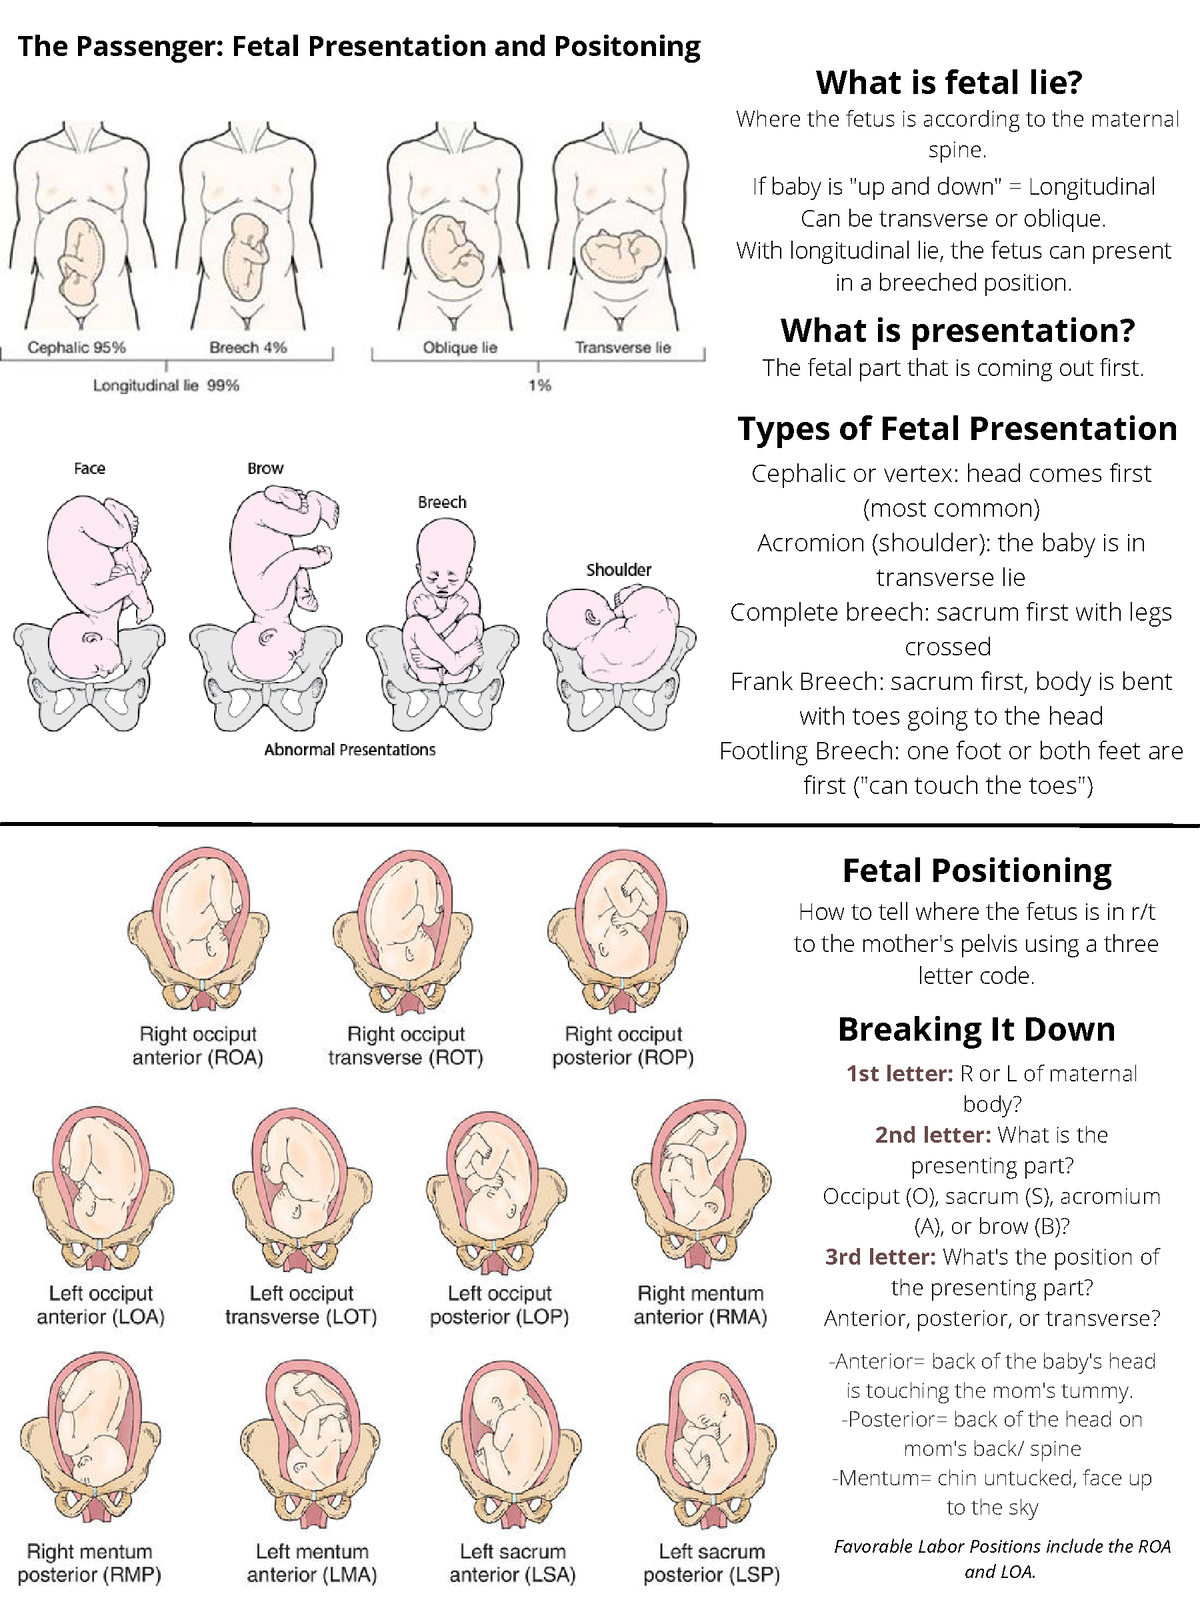 variable presentation of fetus means